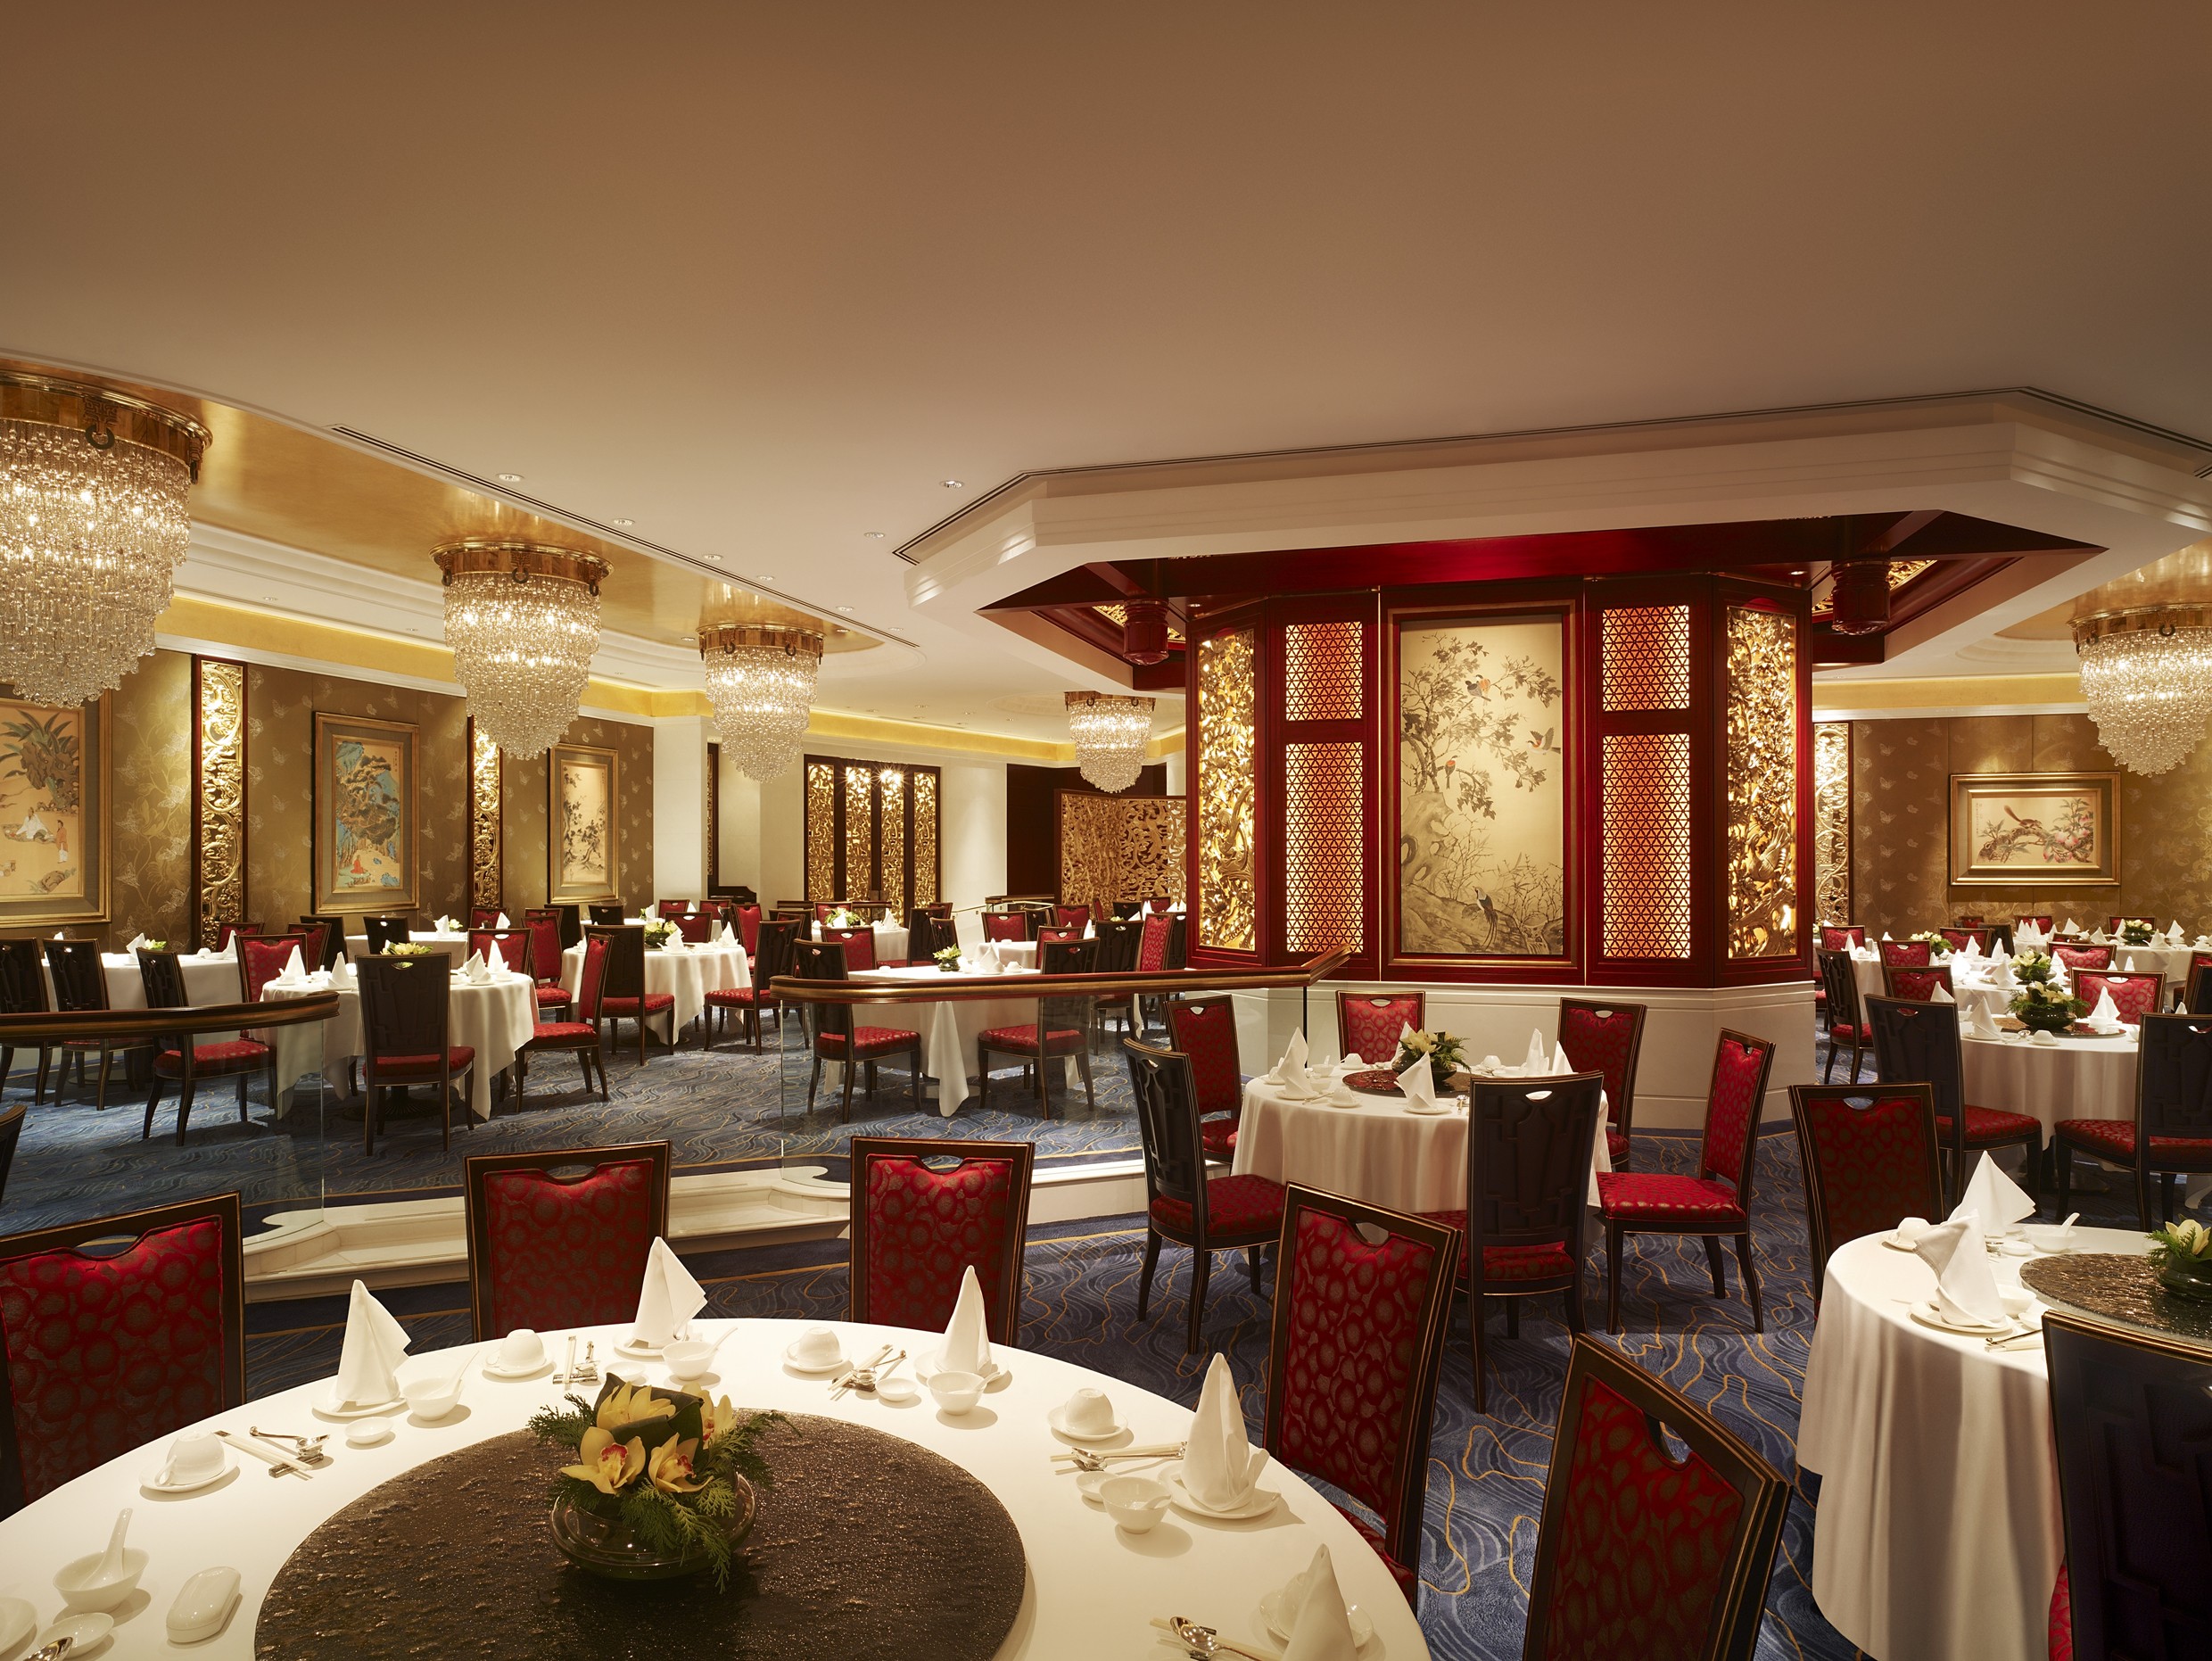 Summer Palace offers an opulent and spacious dining room. Photos: handouts